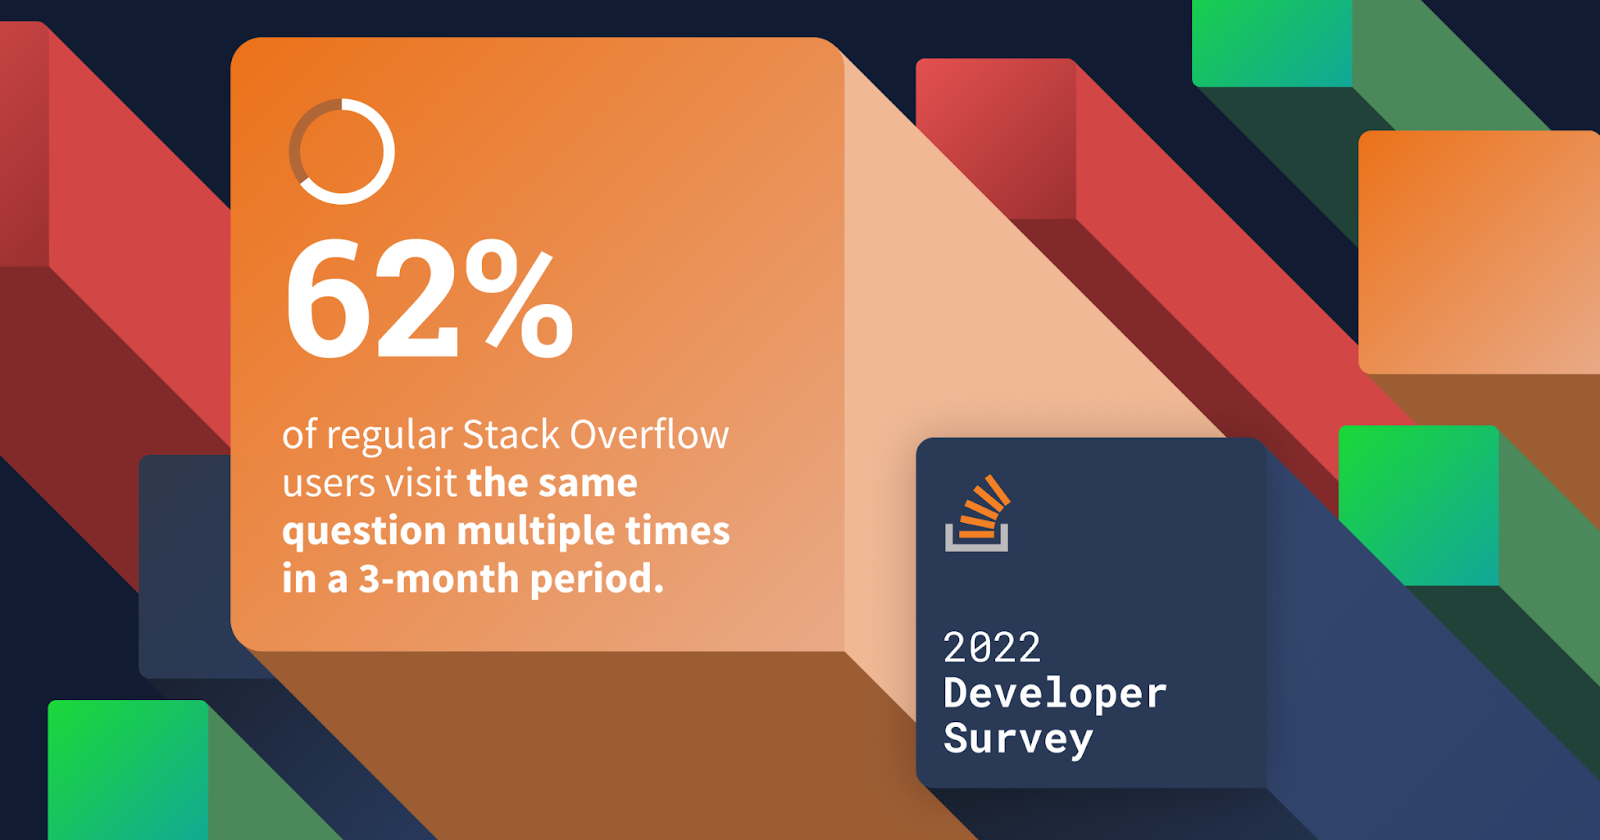 Graphic of statistic: 62% of regular Stack Overflow users visit the same question multiple times in a 3-month period.